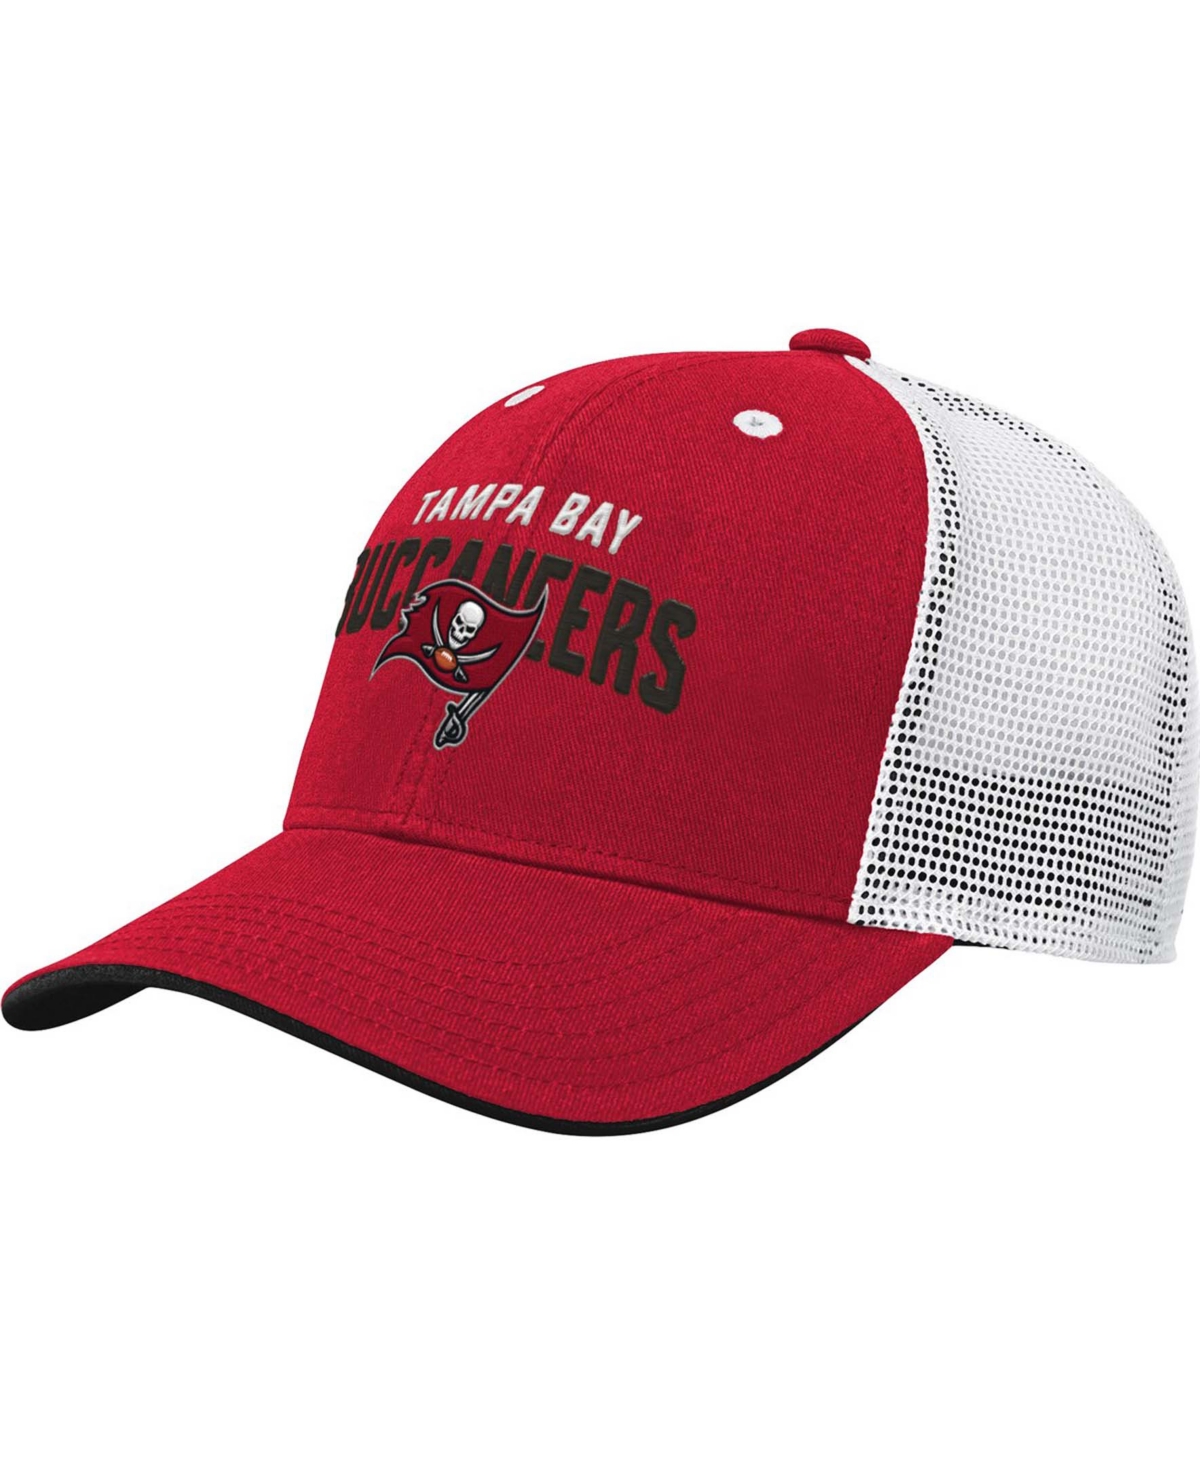 Outerstuff Kids' Big Boys And Girls Red, White Tampa Bay Buccaneers Core Lockup Snapback Hat